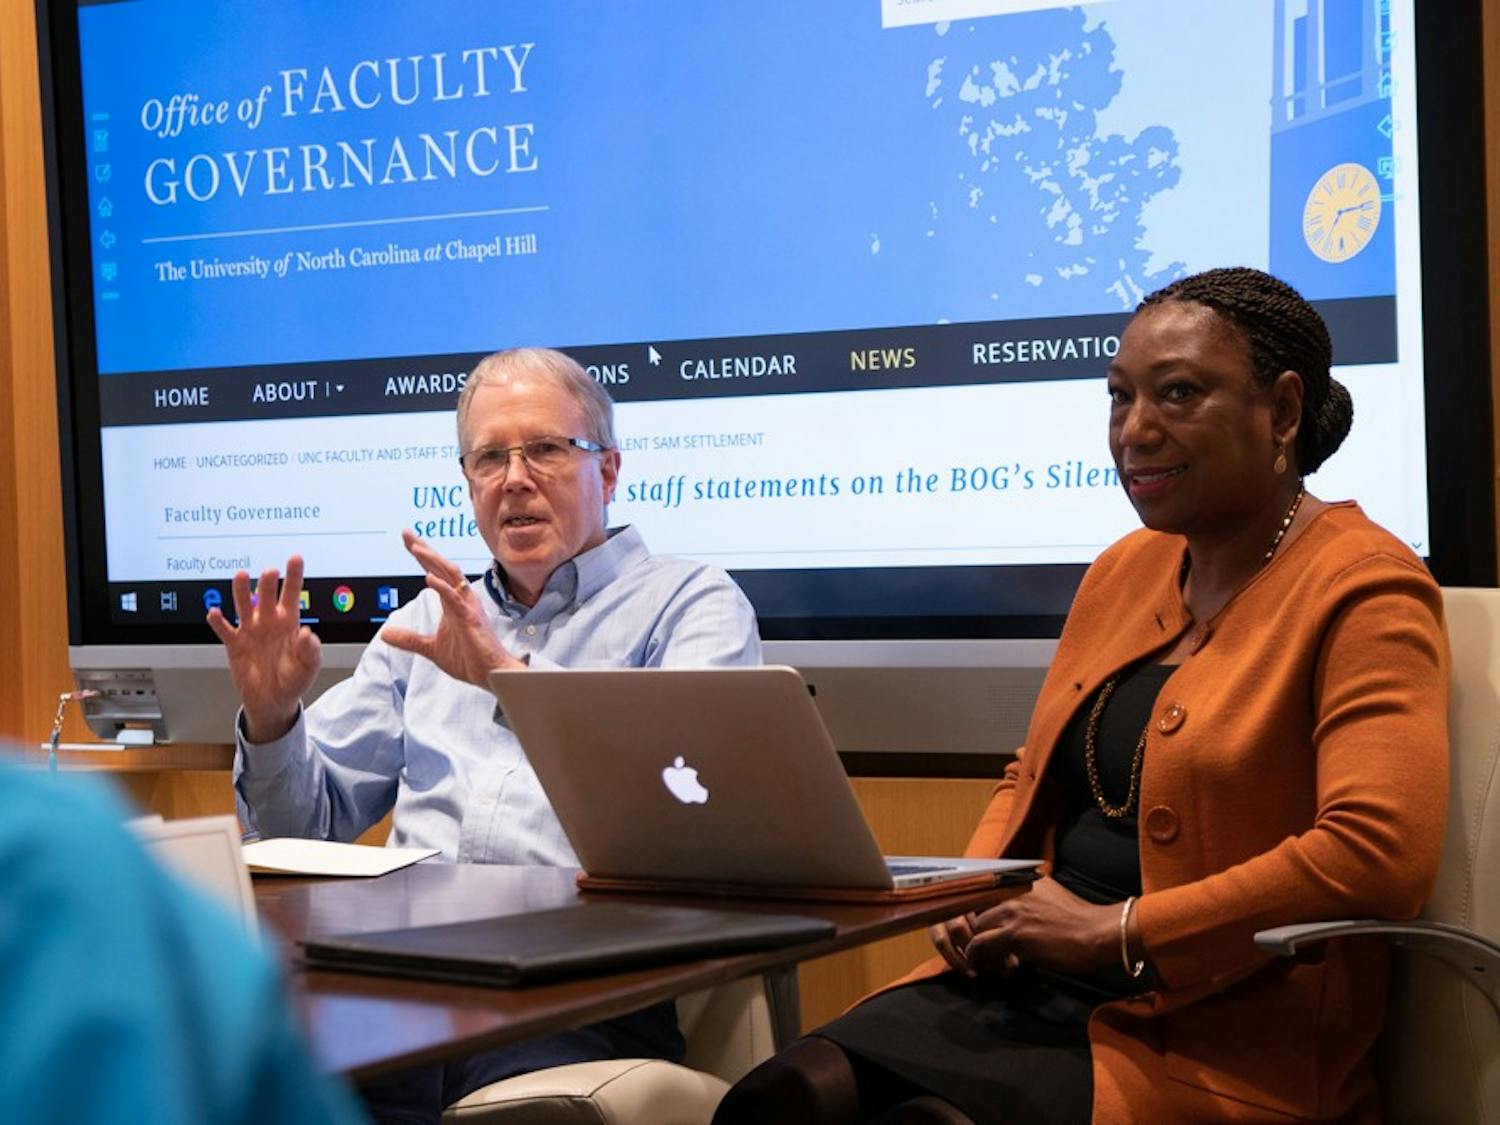 Jim Leloudis (middle) and Patricia Parker (right), co-chairs of UNC's new Reckoning Commission, discuss the Commission on History, Race and a Way Forward with Jennifer Larson (left) during the Faculty Executive Meeting at South Building on Monday, Jan. 13, 2020.&nbsp;